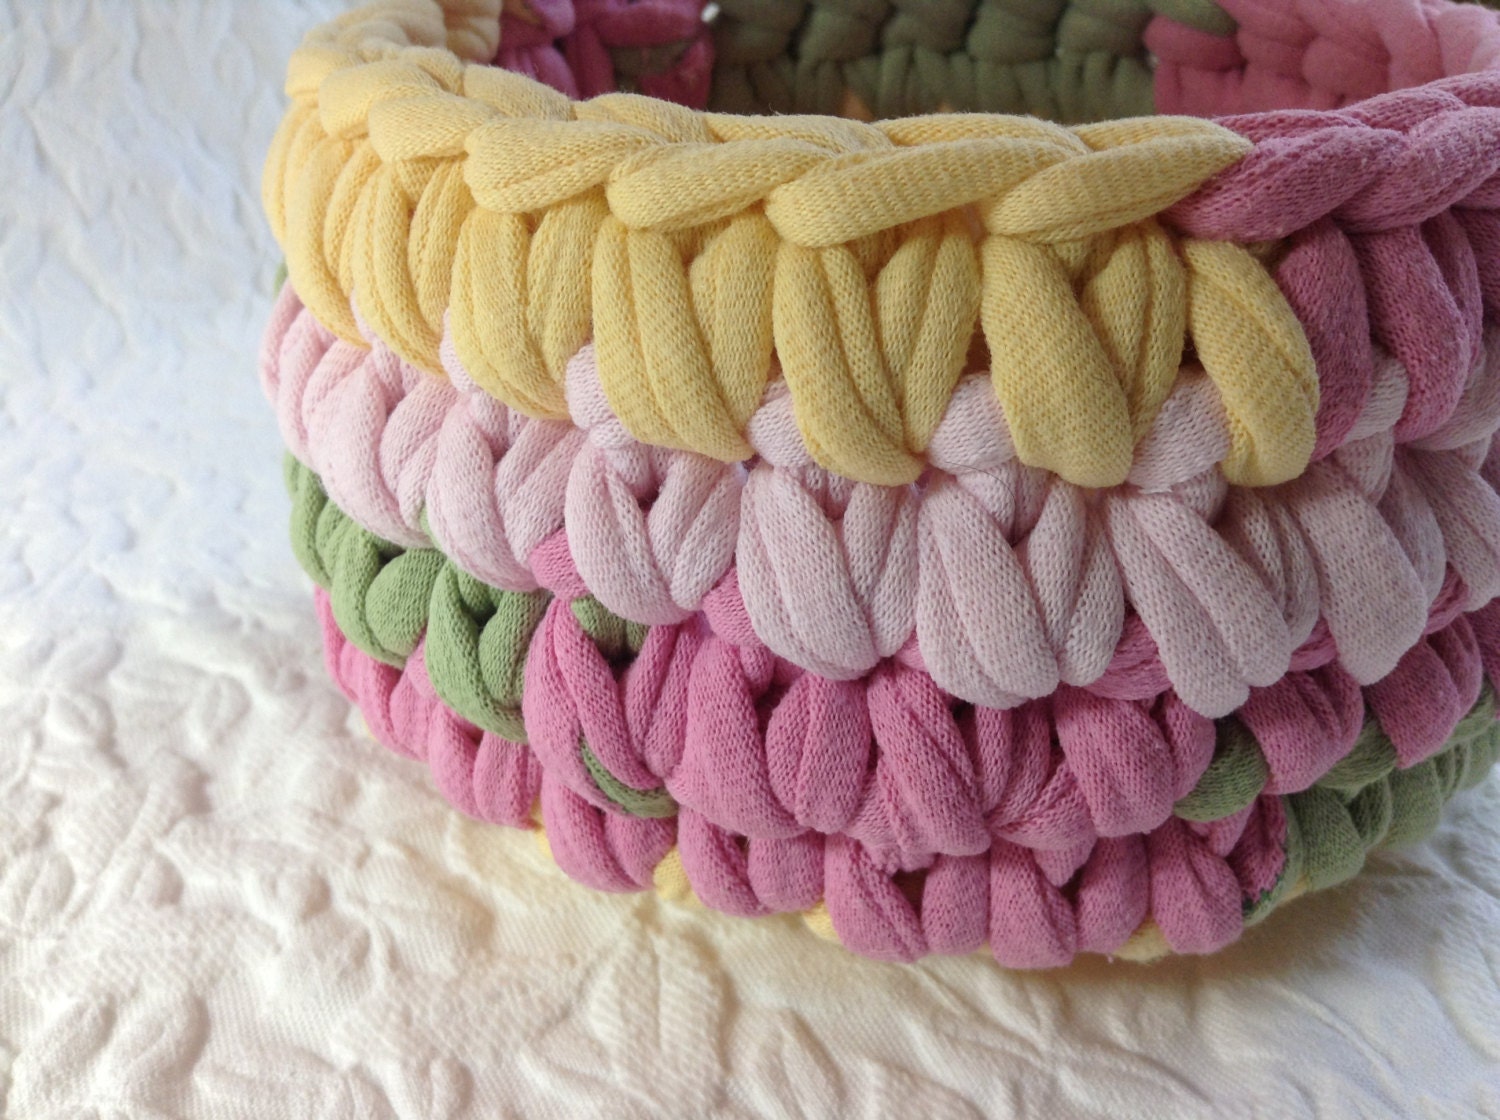 Pastel cotton crocheted baskets created from recycled t shirts